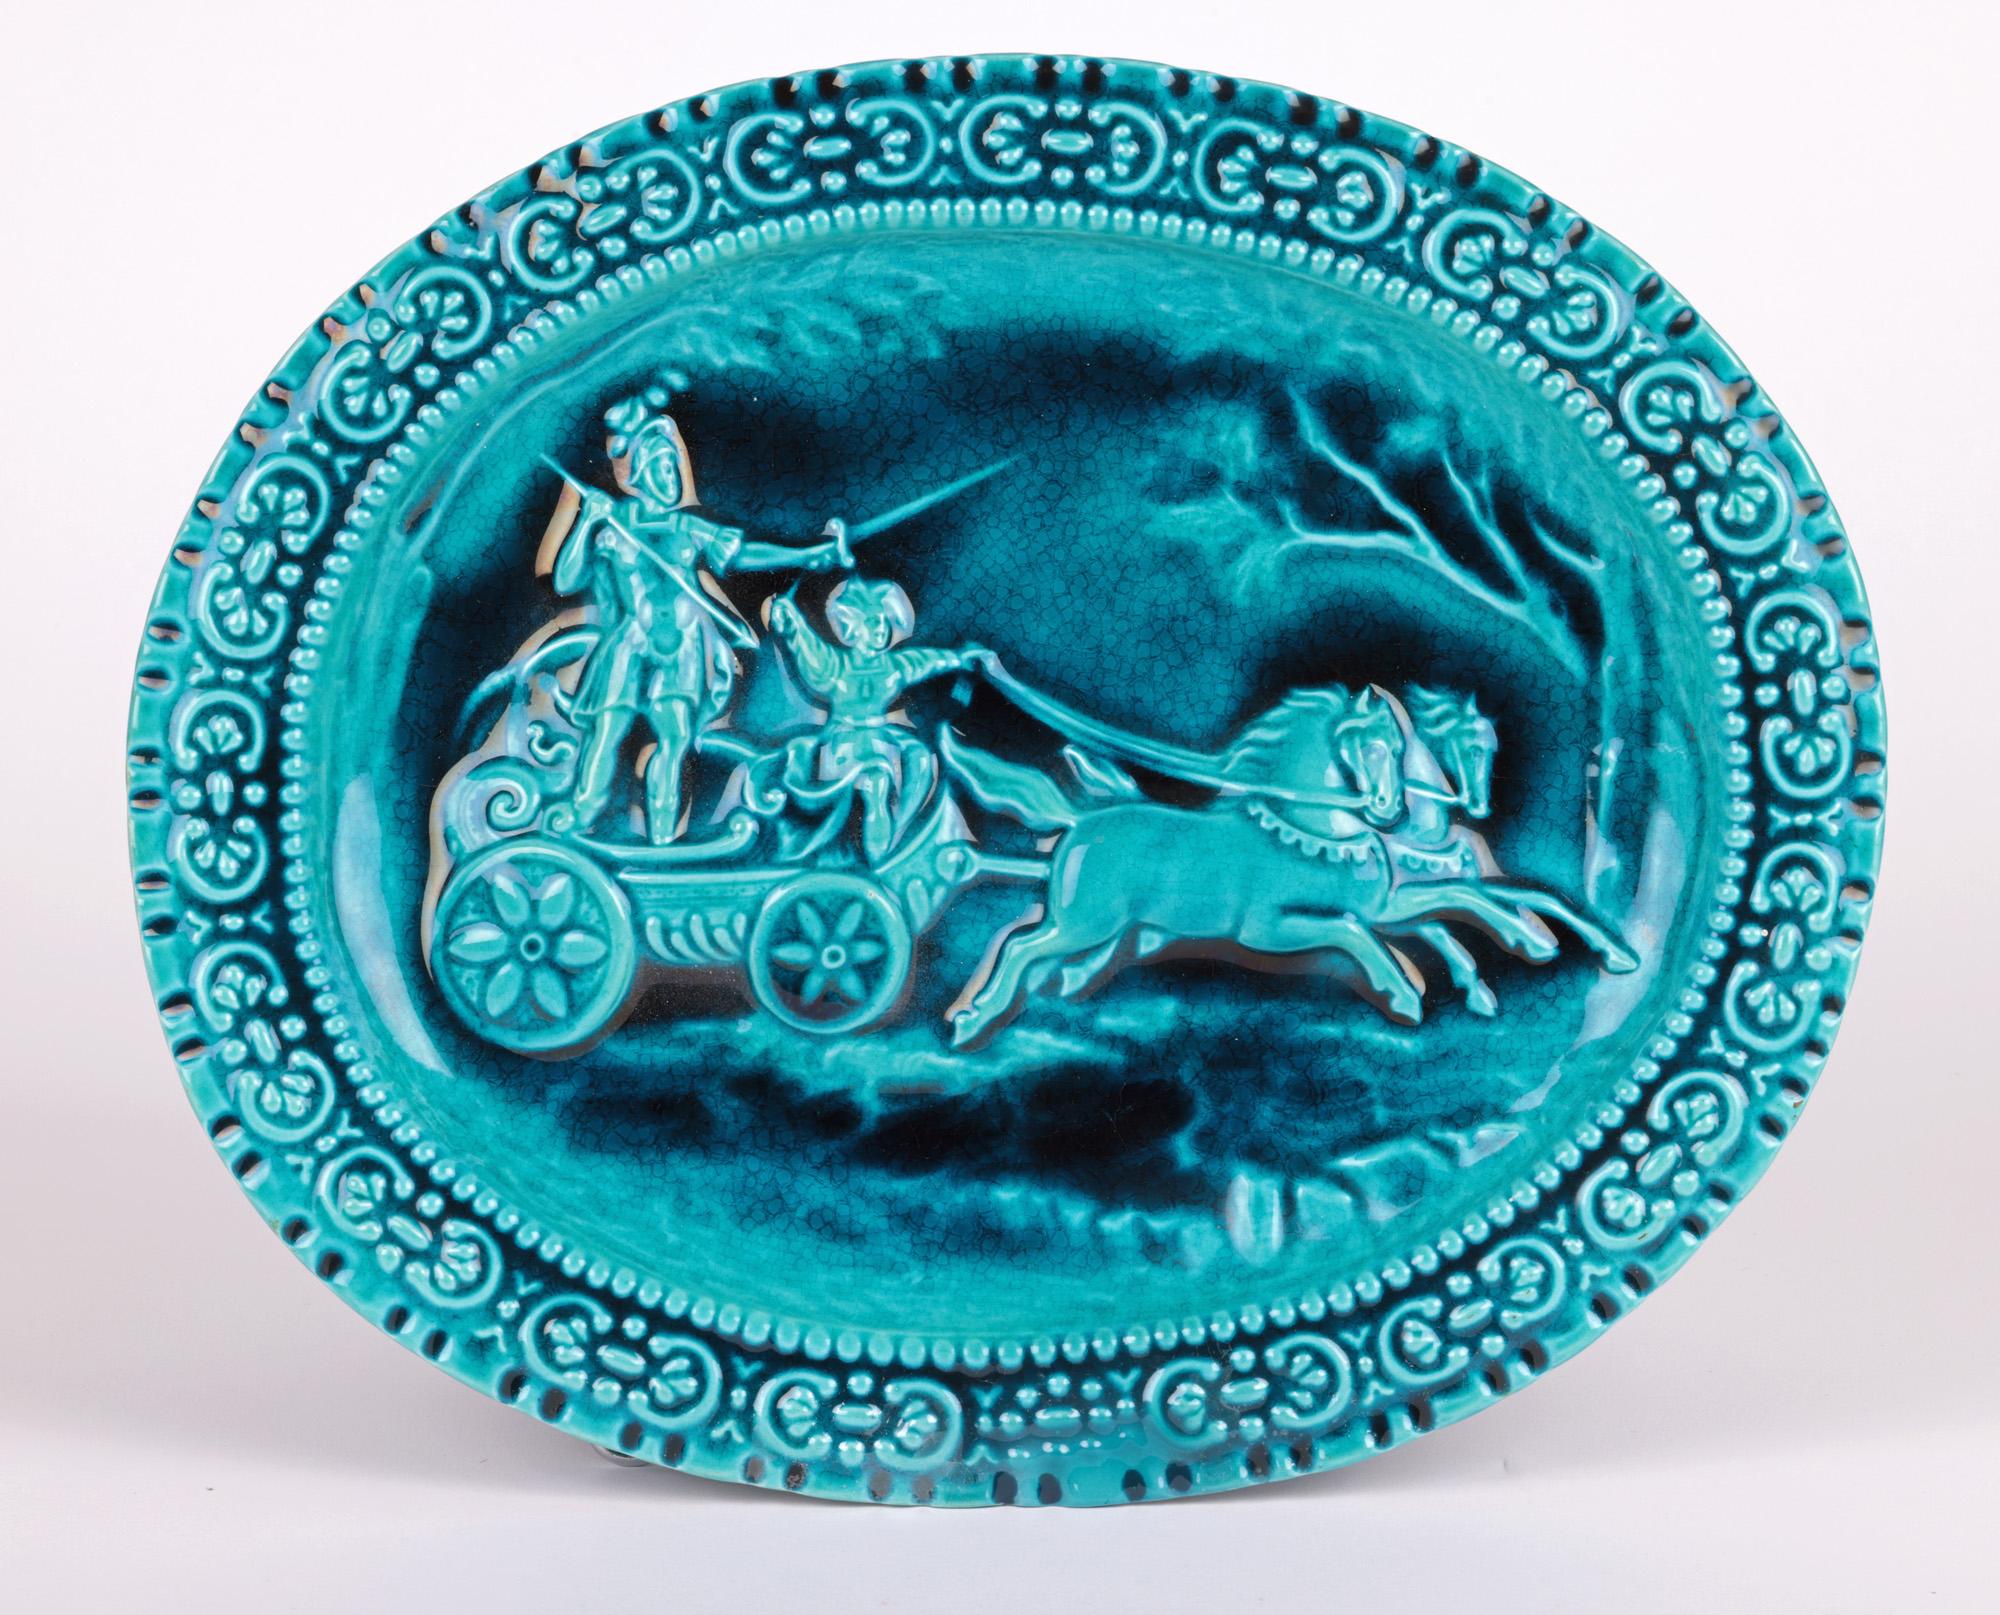 English Maw & Co Walter Crane Majolica Chariot Art Pottery Plaque For Sale